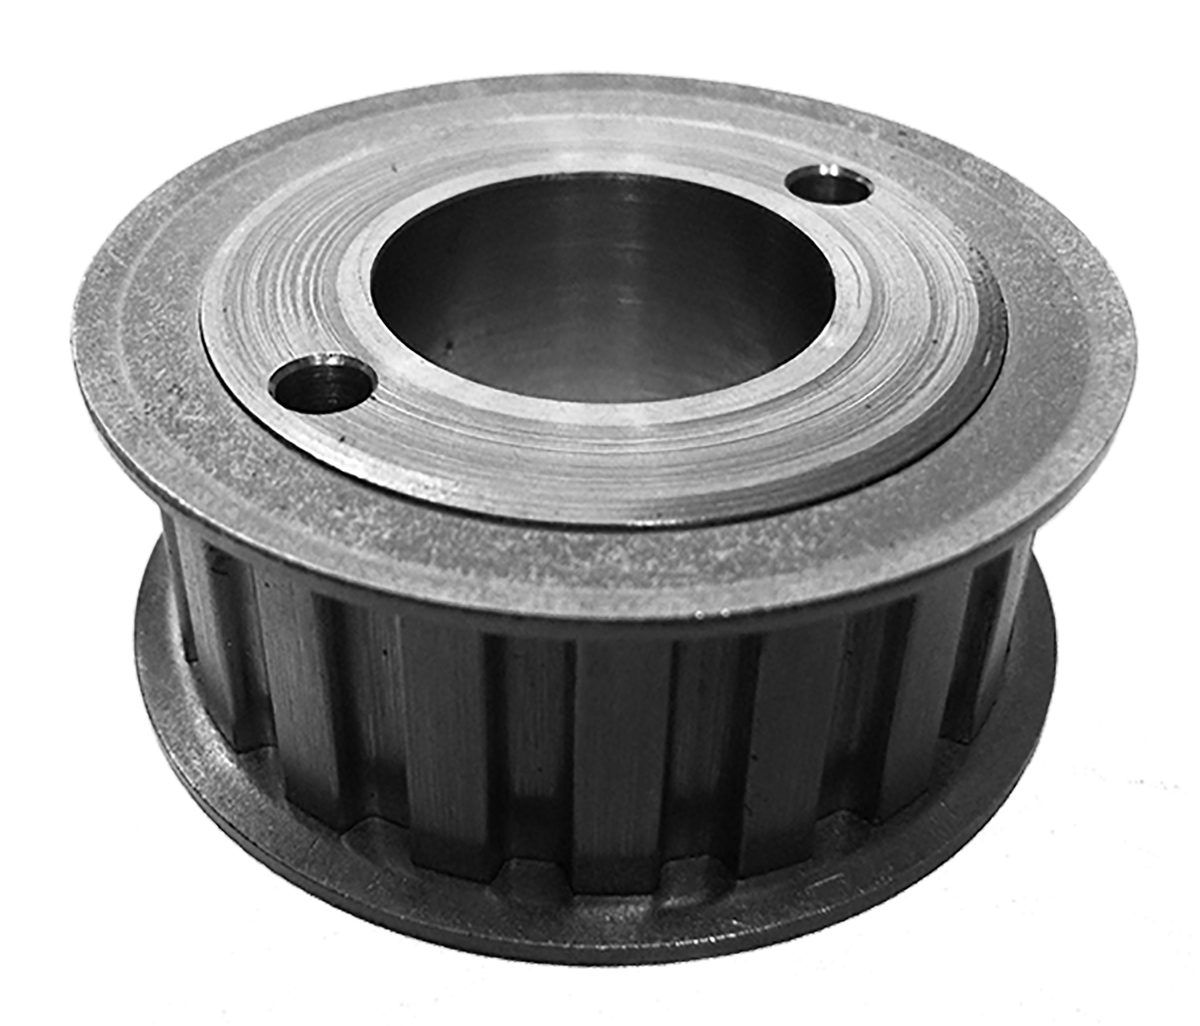 44LH075 - Cast Iron Imperial Pitch Pulleys